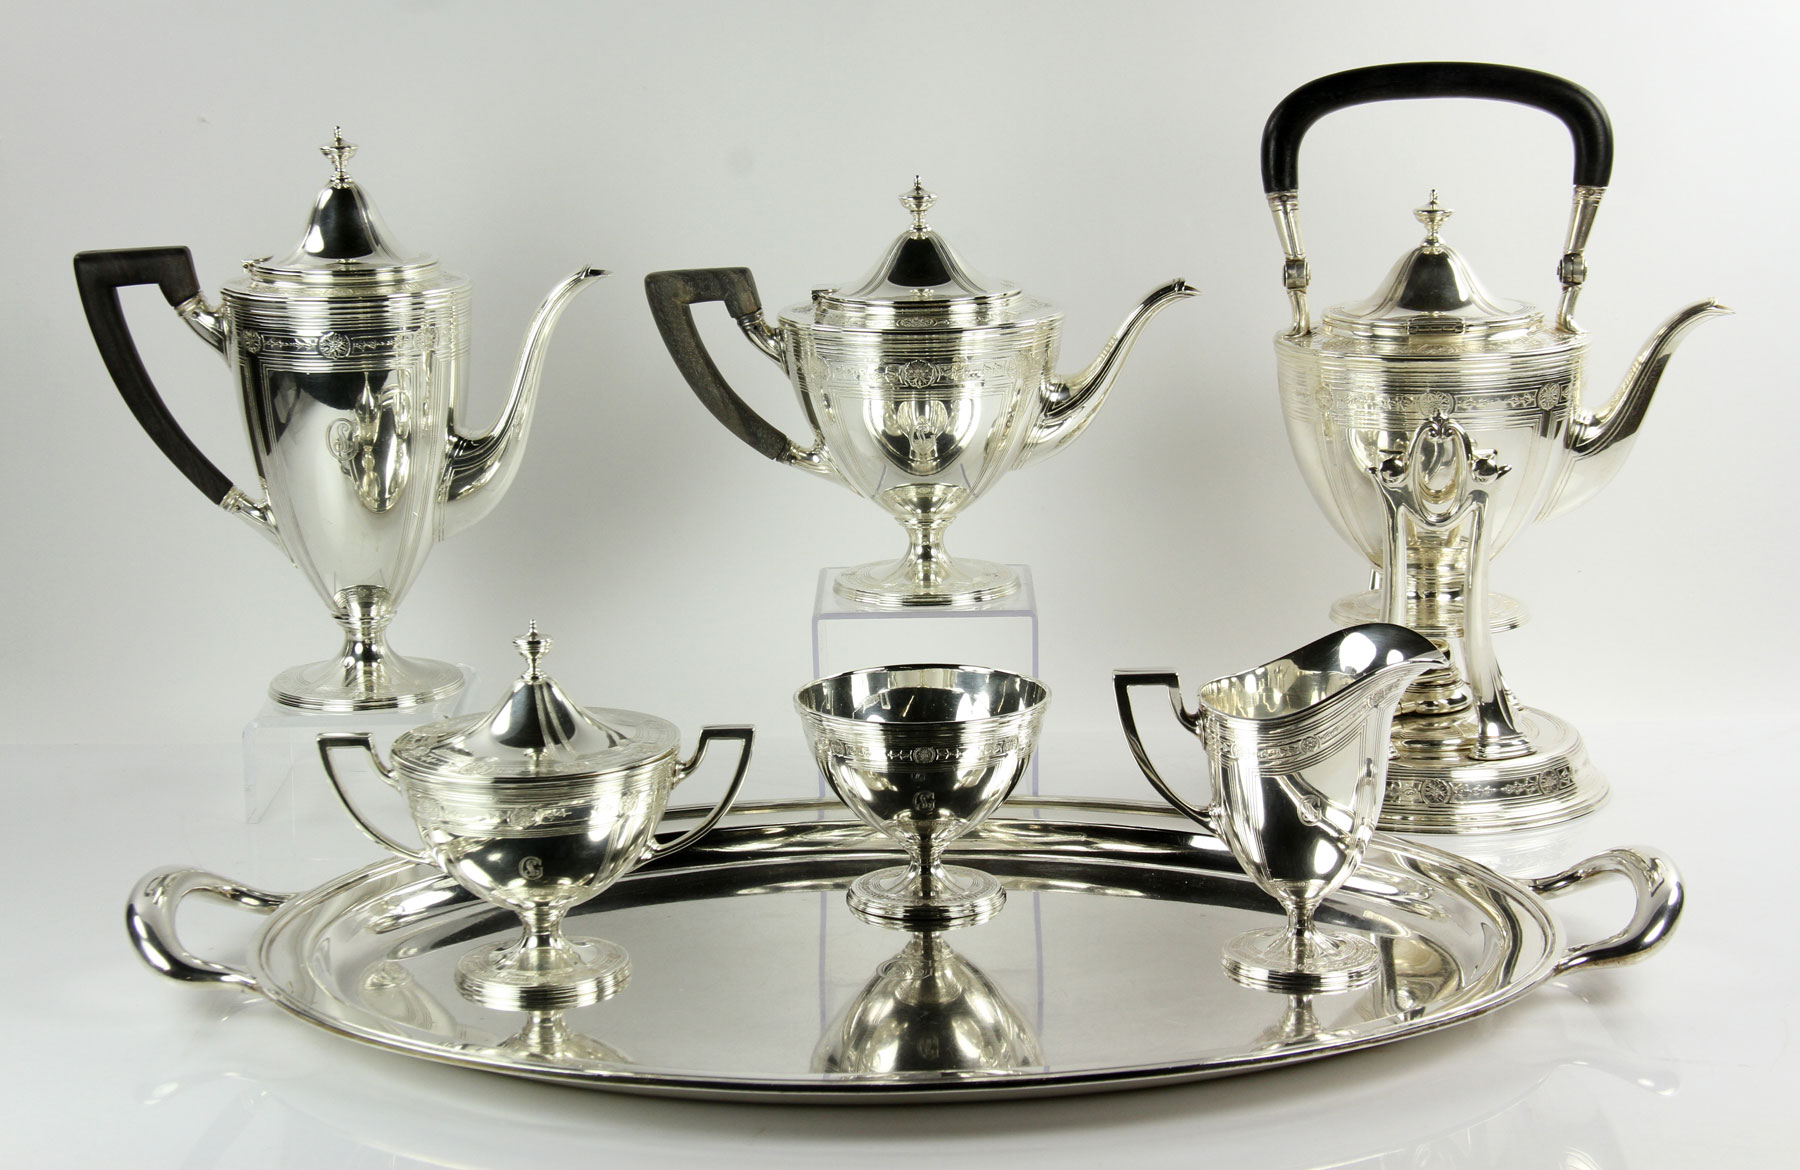 Tiffany & Co. Sterling Tea and Coffee Set